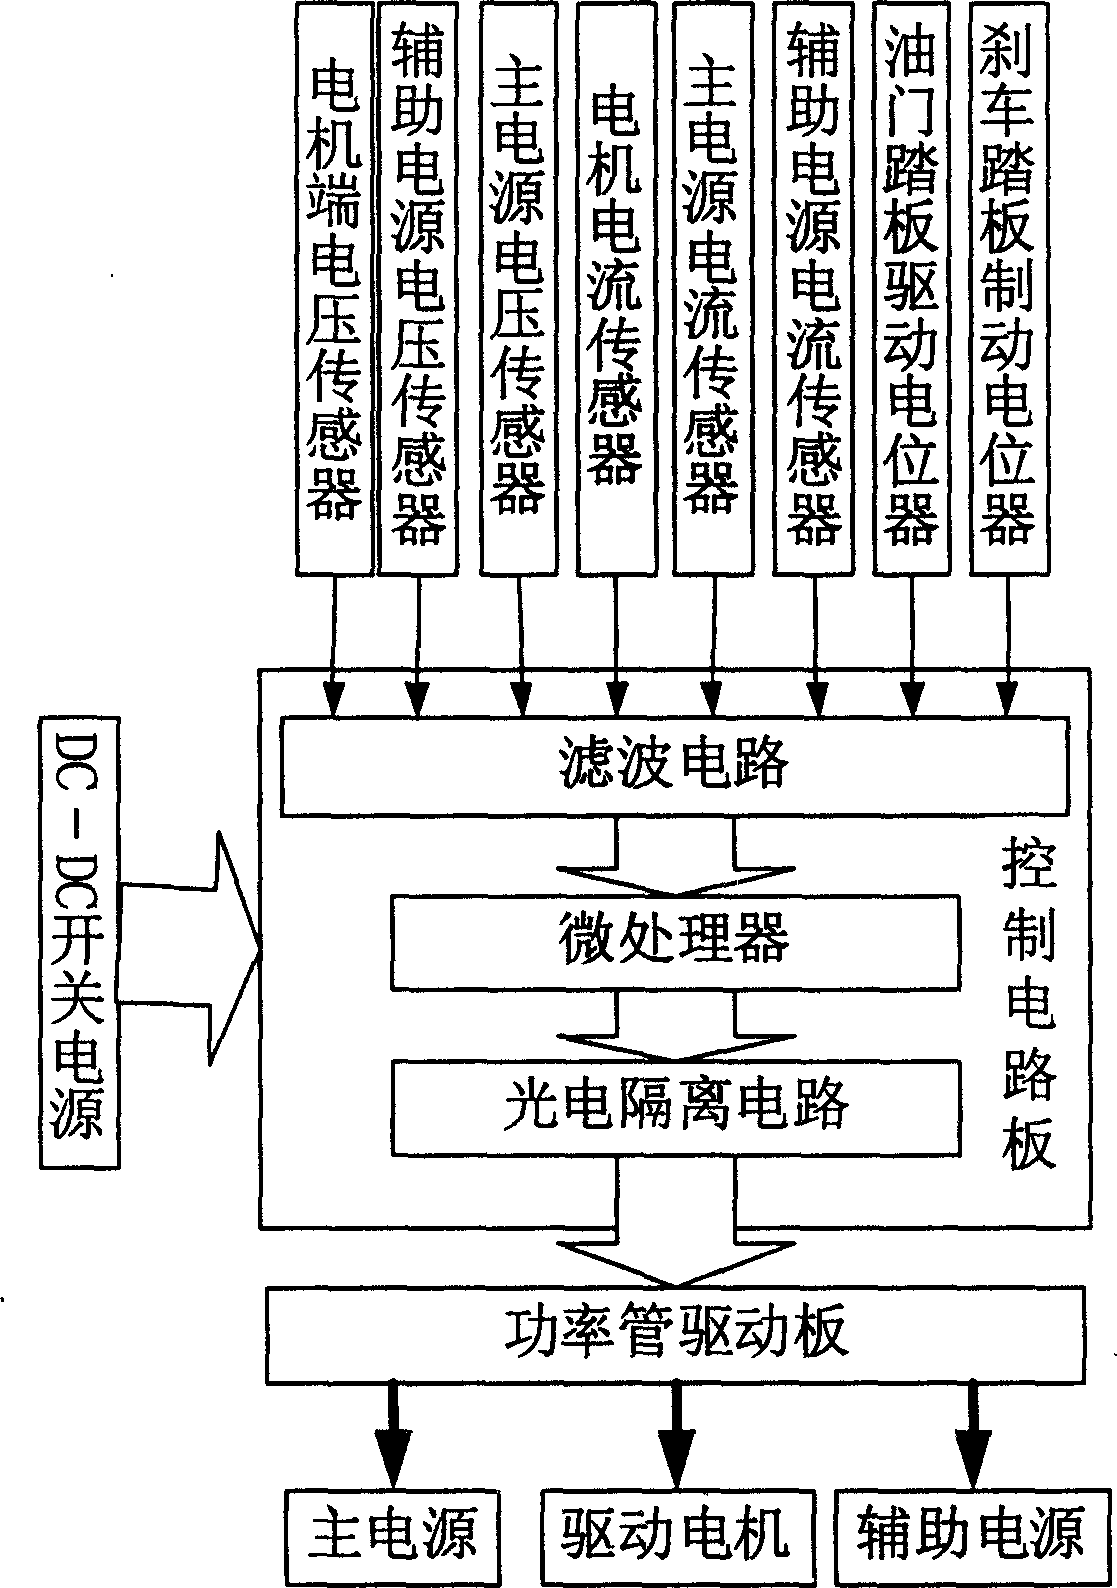 Auxiliary energy regenertion power system for electric automobile